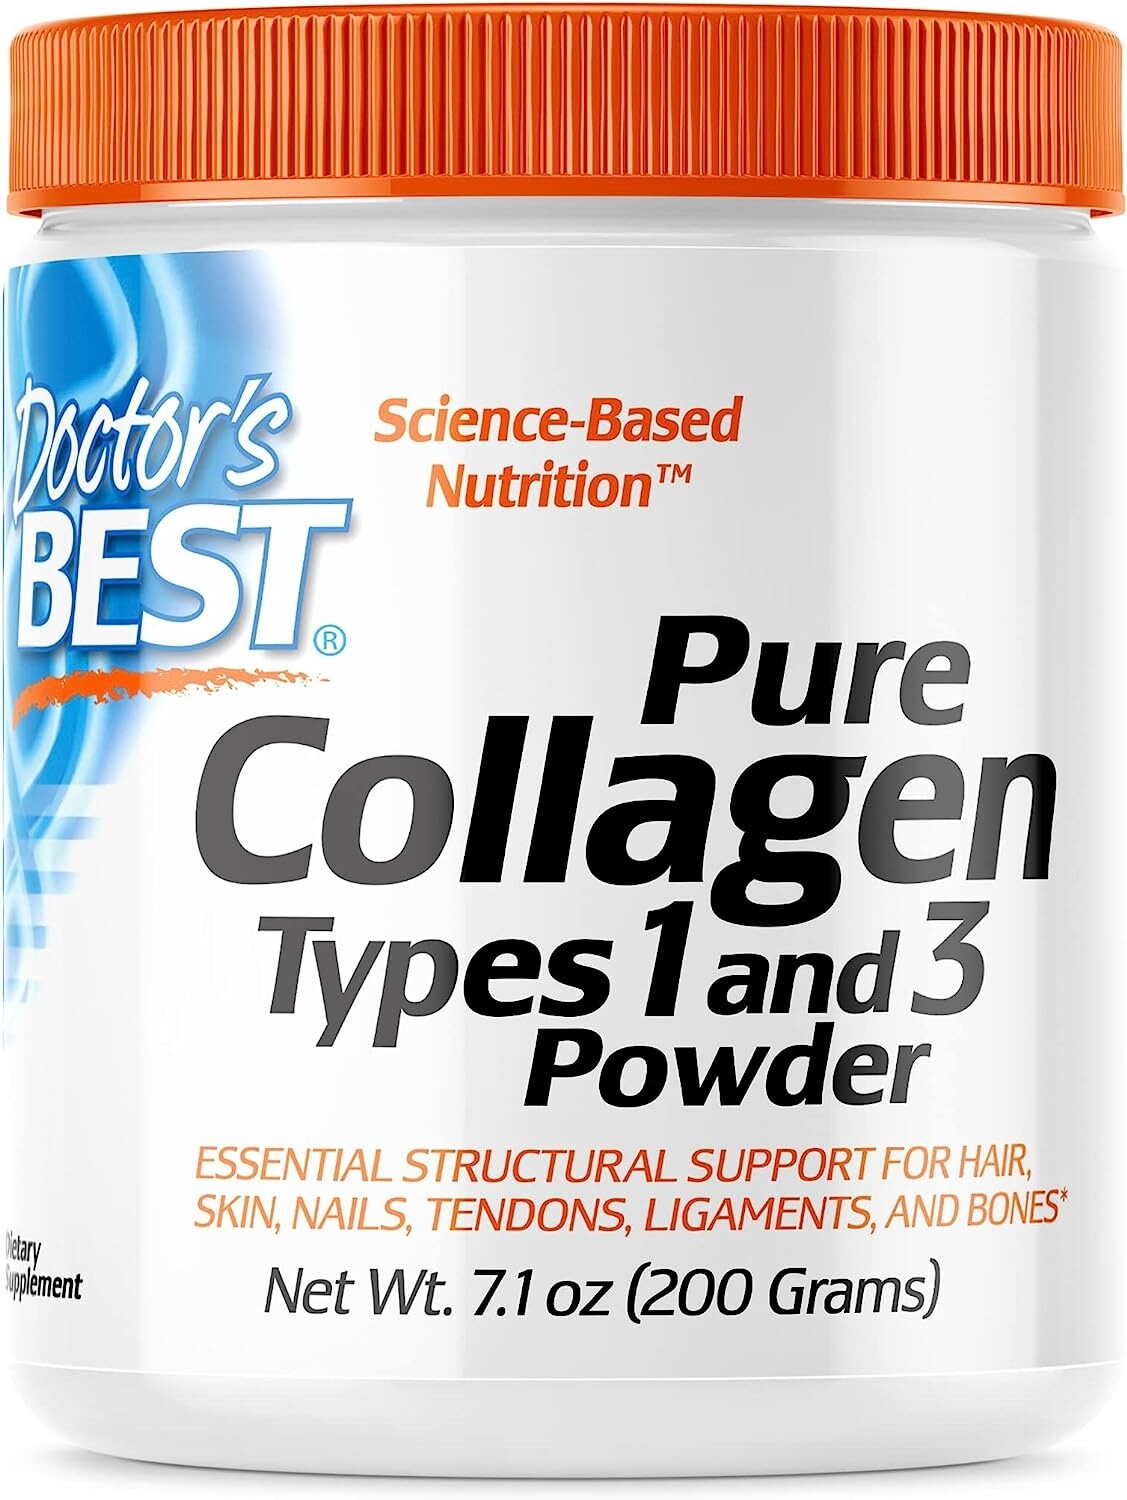 Doctor's Best Pure Collagen Powder Type 1 and 3 (200g) - Unflavored